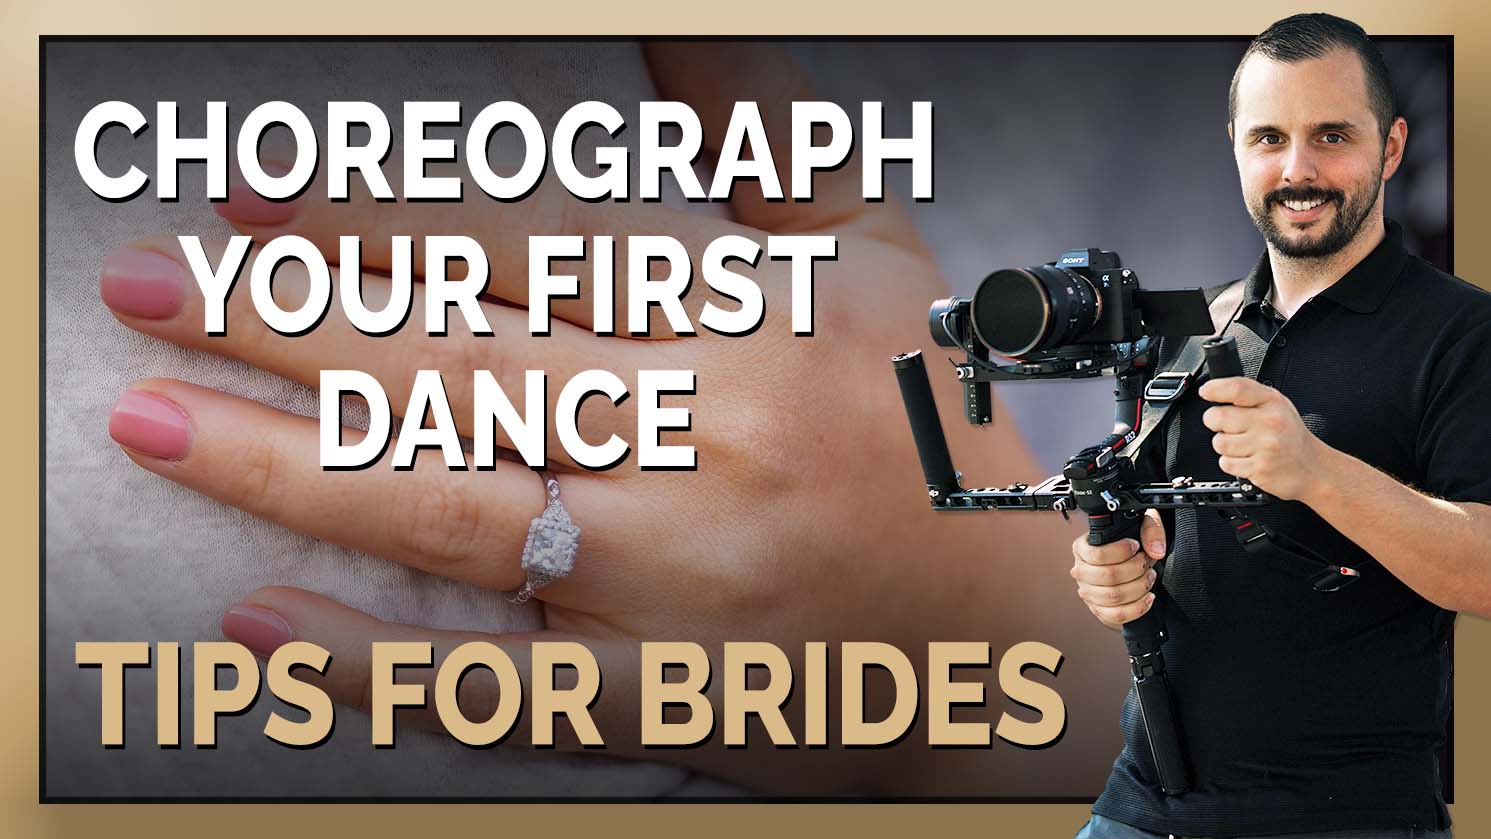 Why You Should Choreograph Your First Dance